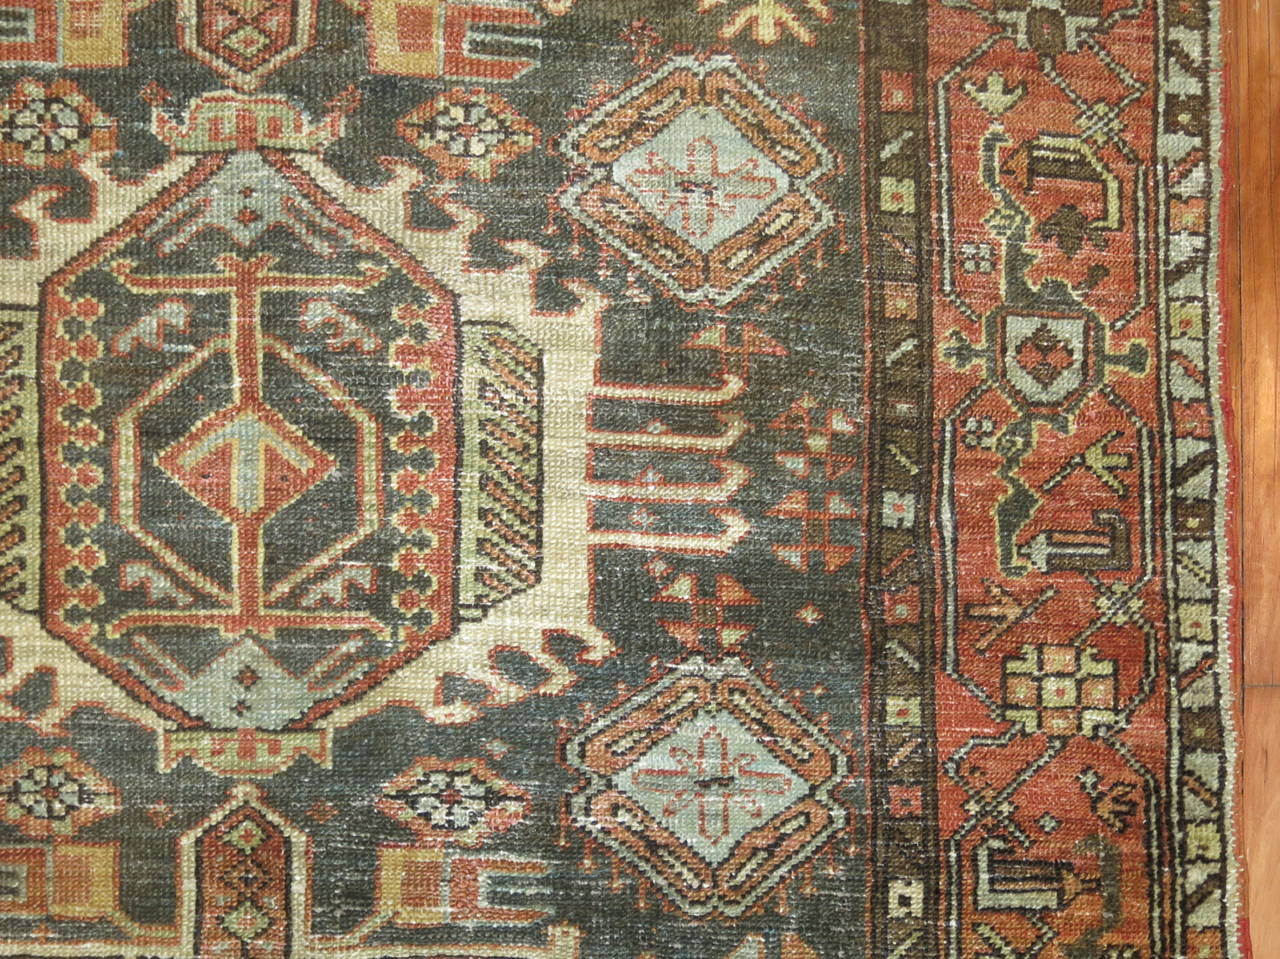 Produced in the Karajeh (also know as Karadja), a small village near Tabriz these rugs are distinguished by their use of triple and all-over medallions. Although the standard Heriz medallion is used, smaller Karajeh Persian rugs are ornamented with